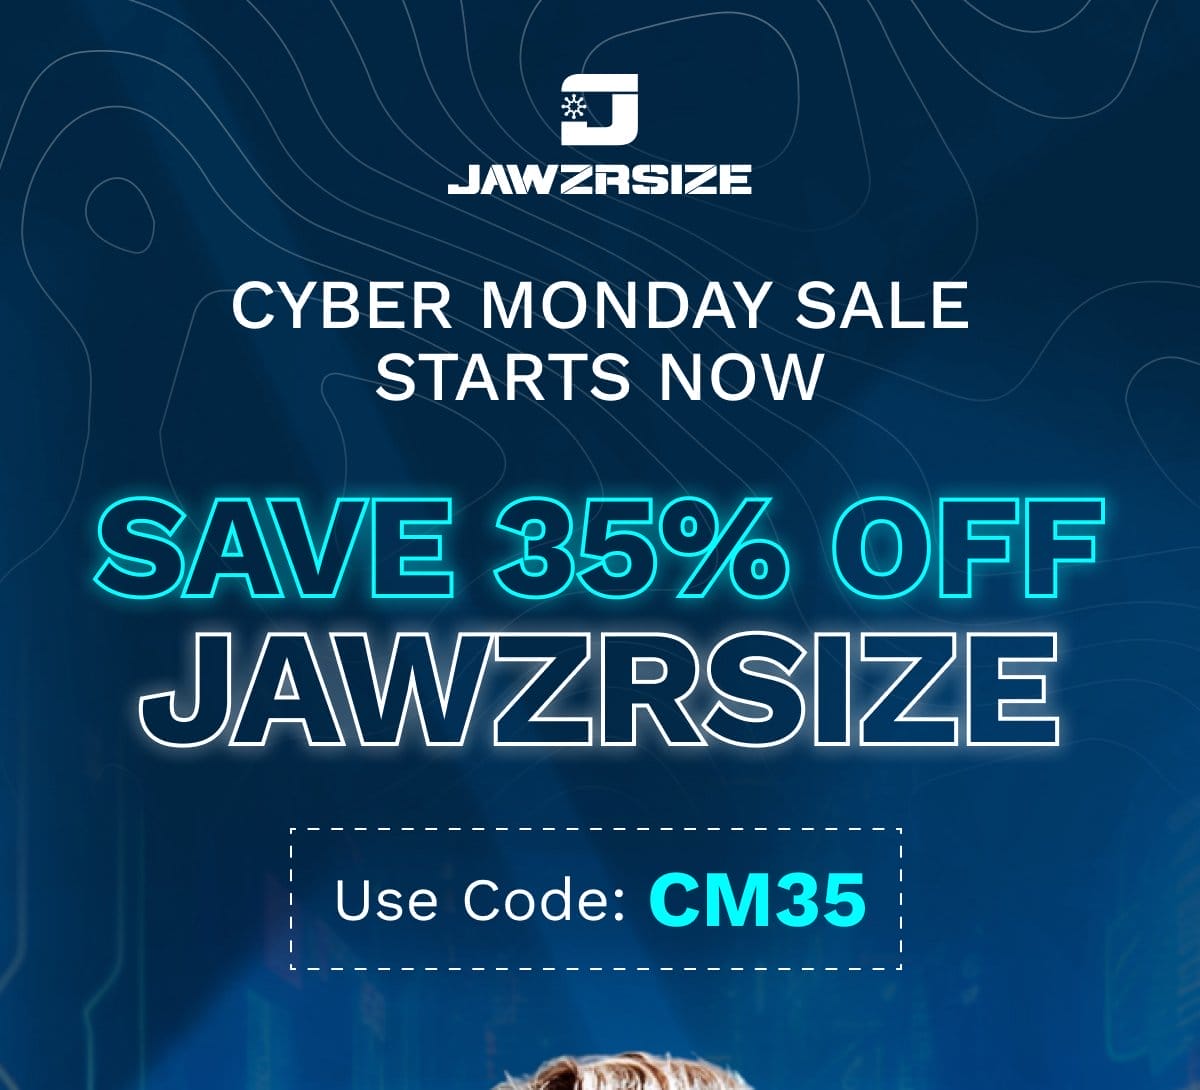 Cyber Monday starts now. Save 35% OFF Jawzrsize with code: CM35